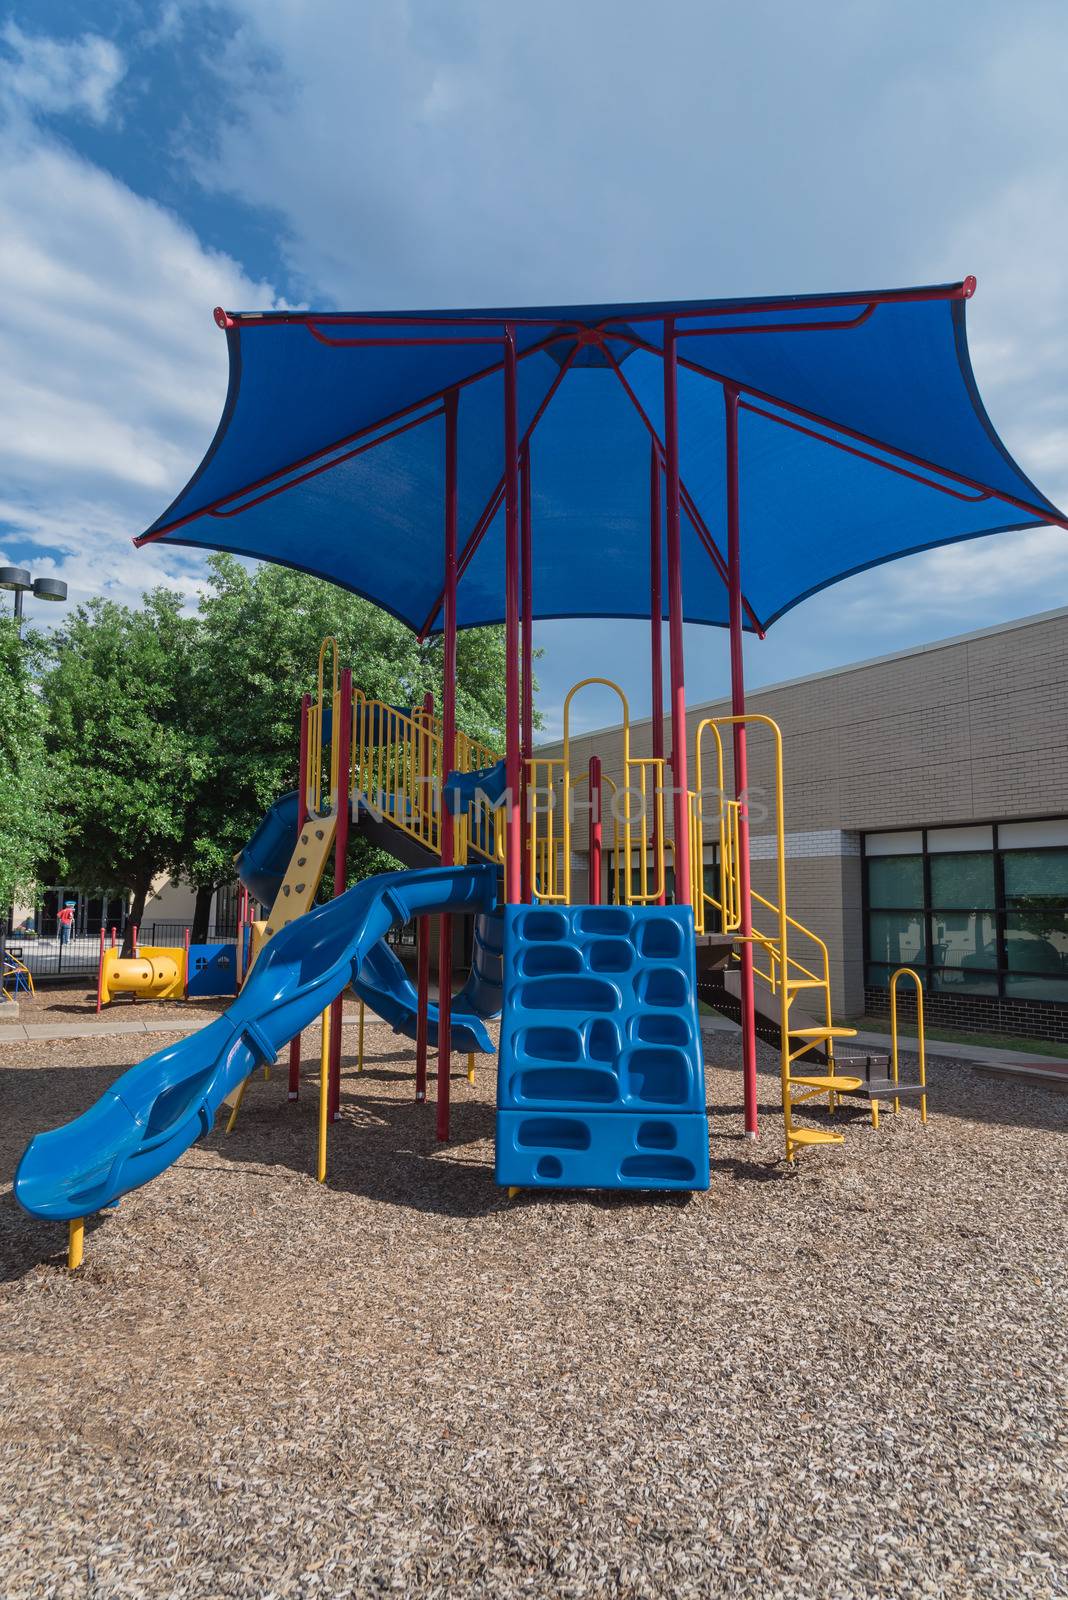 Colorful playground near community recreation facility in Texas, America